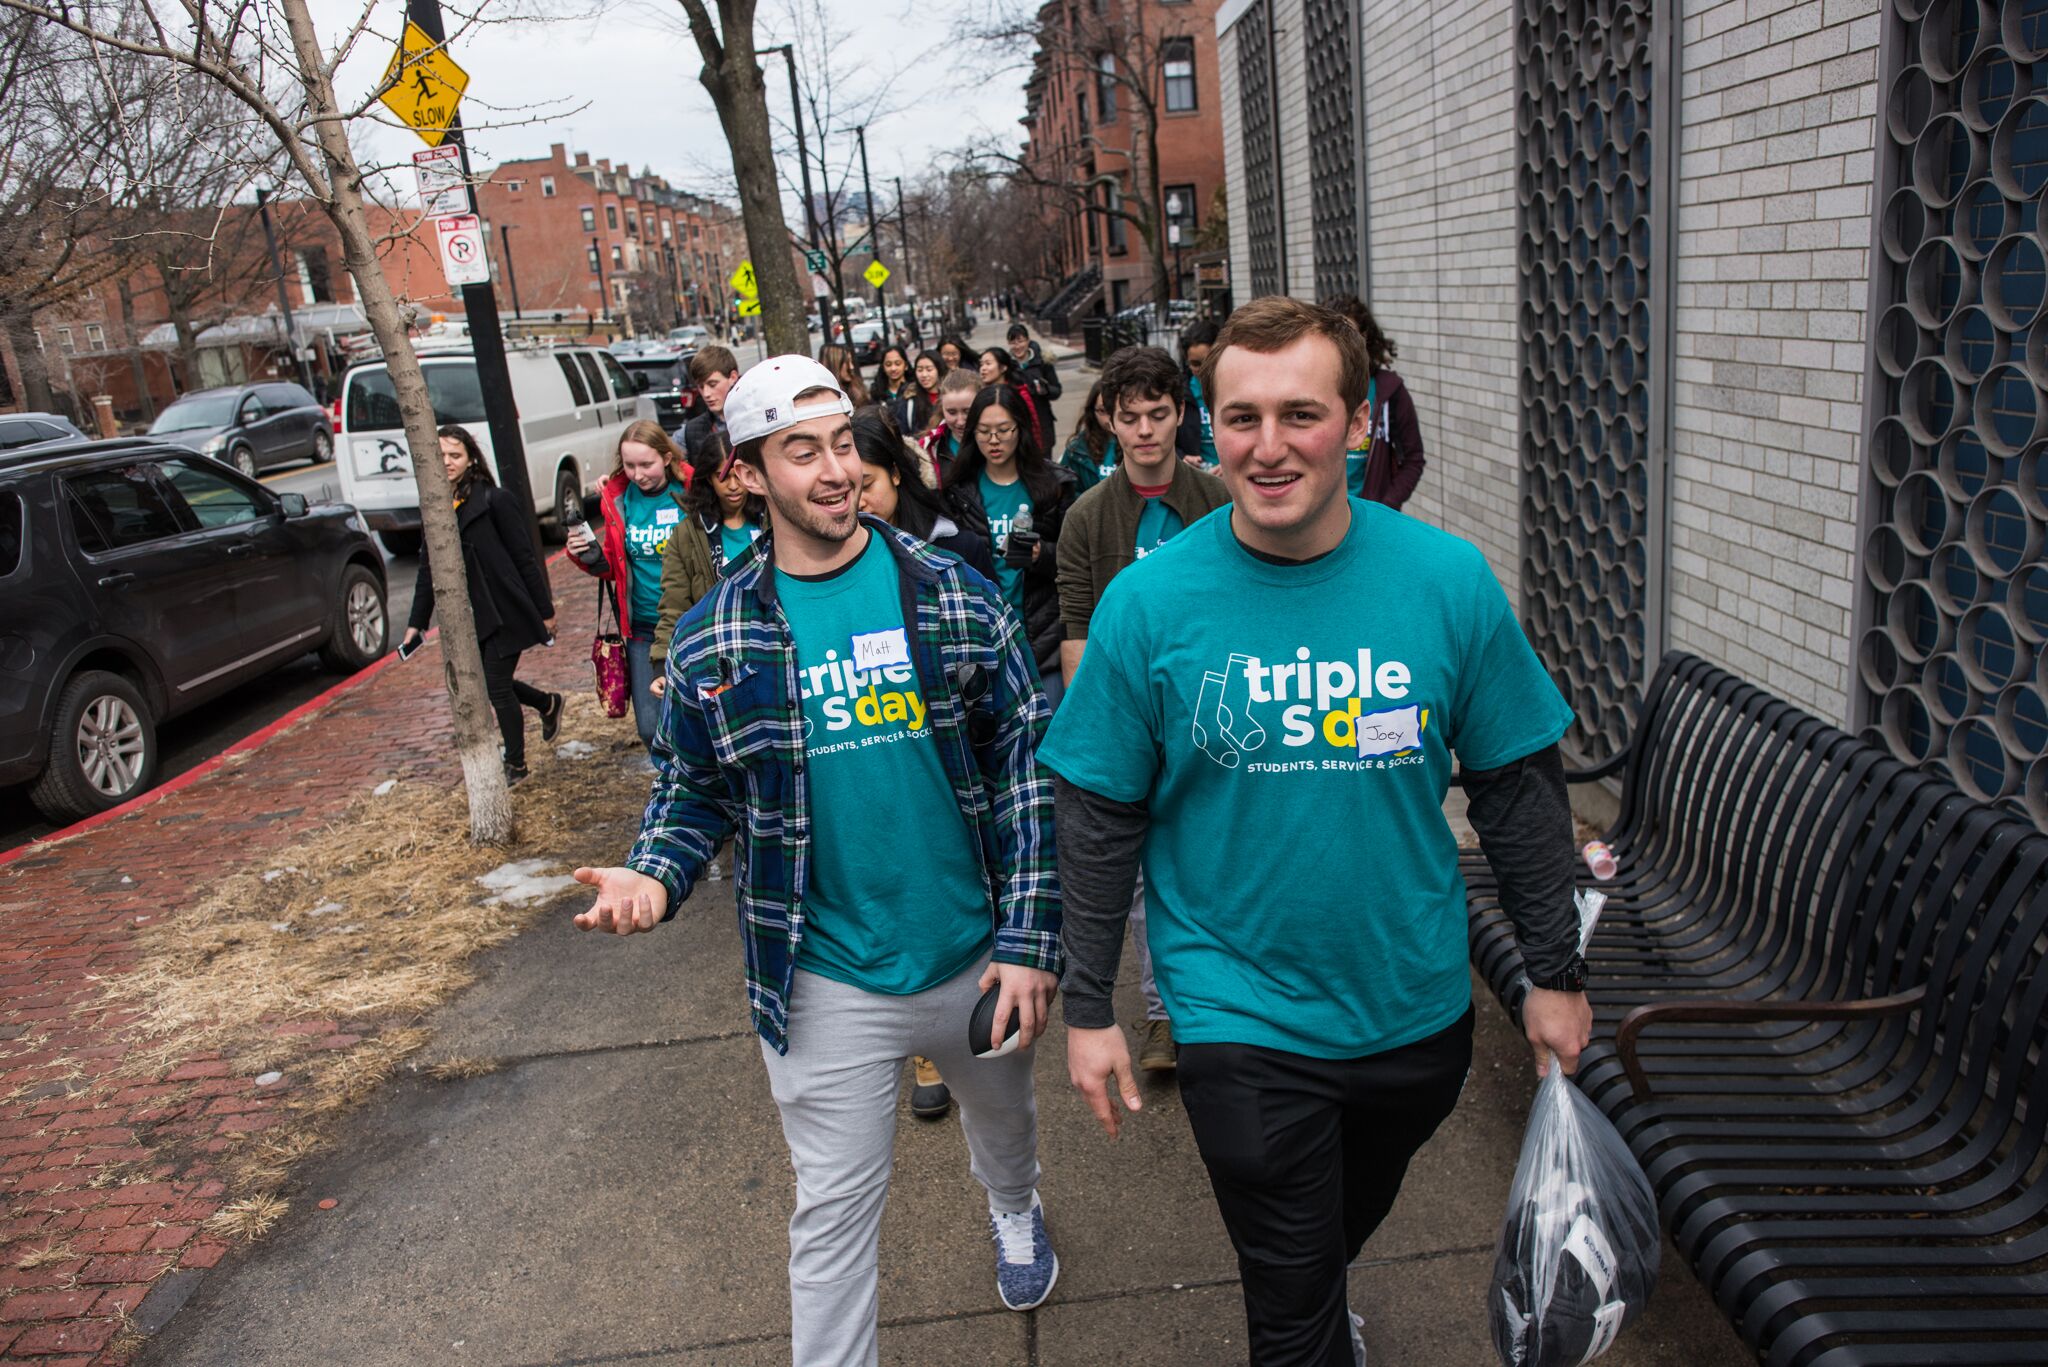 PHOTO: College students walked the streets of Boston delivering 25,000 socks to homeless people.